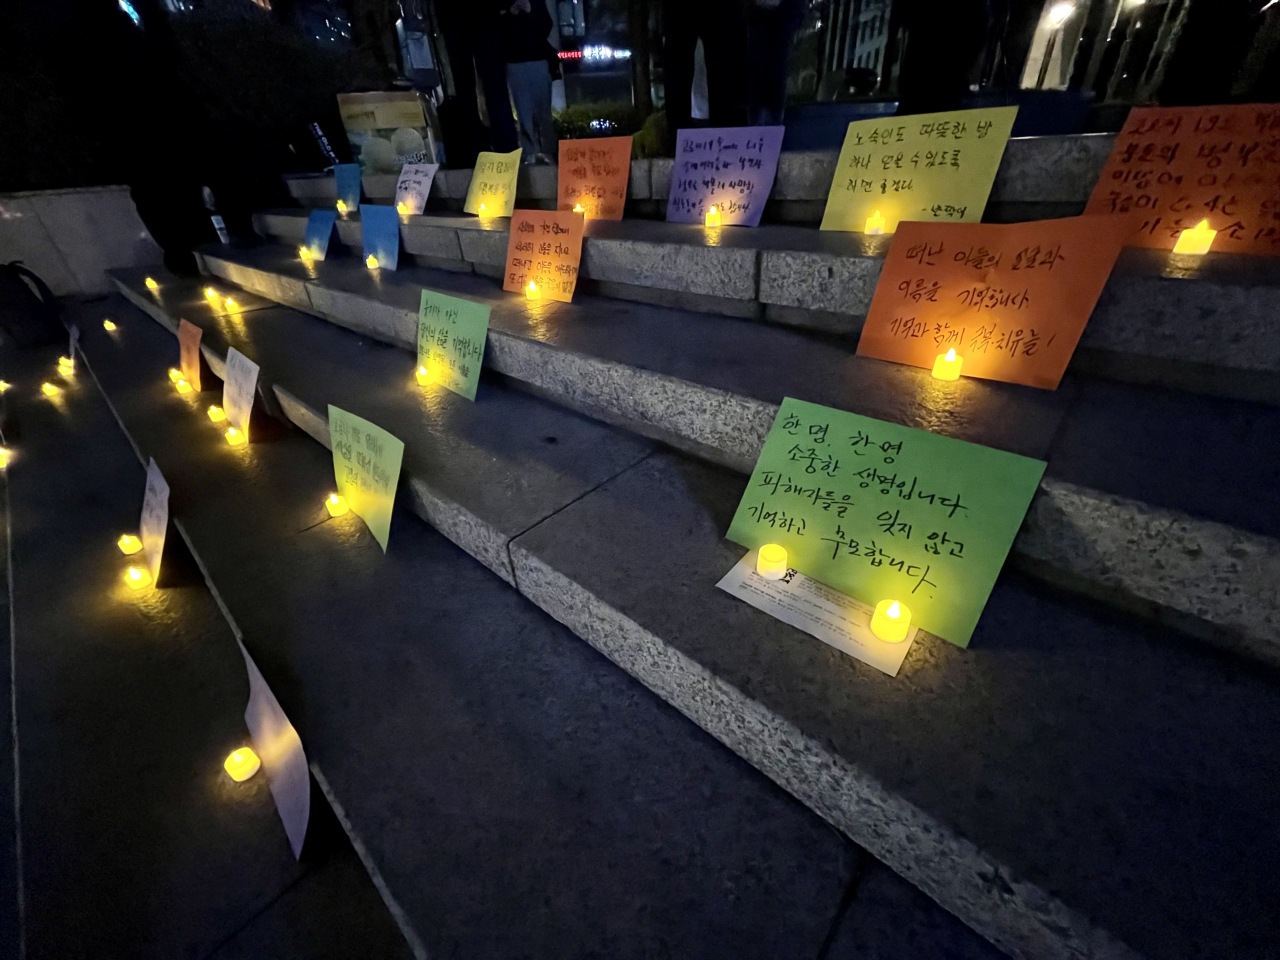 Flameless candles and paper sheets for writing messages were distributed to be displayed on the steps for a brief while. One message read: “No one should be alone in their final moments. I hope you are not lonely anymore.” (Kim Arin/The Korea Herald)